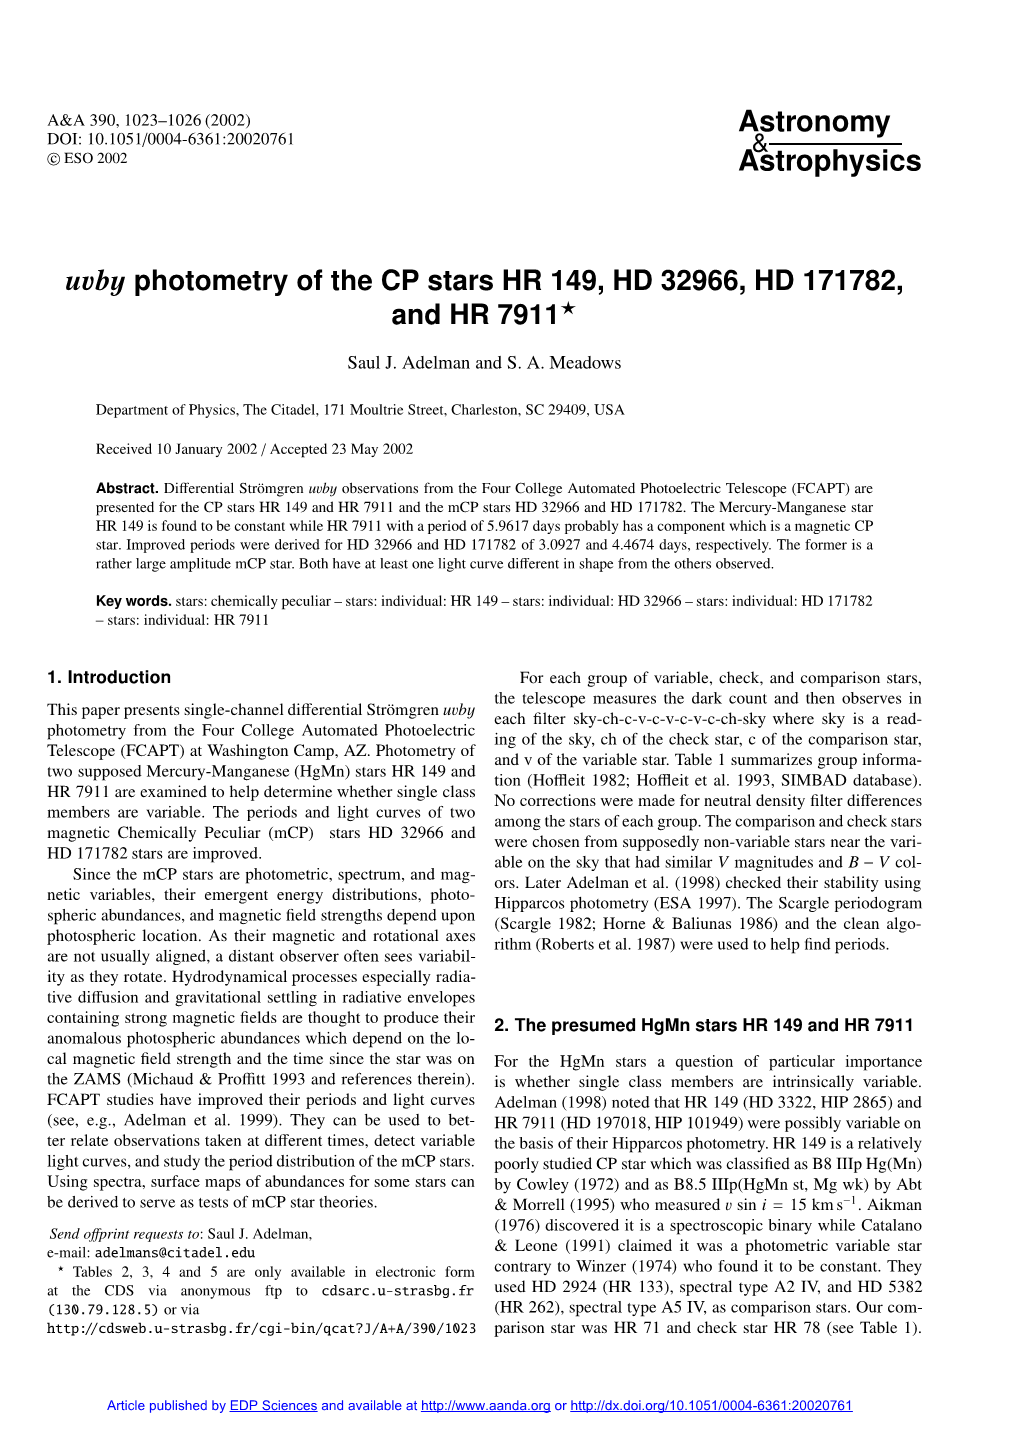 Vec{Uvby}$ Photometry of the CP Stars HR 149, HD 32966, HD 171782, and HR 7911